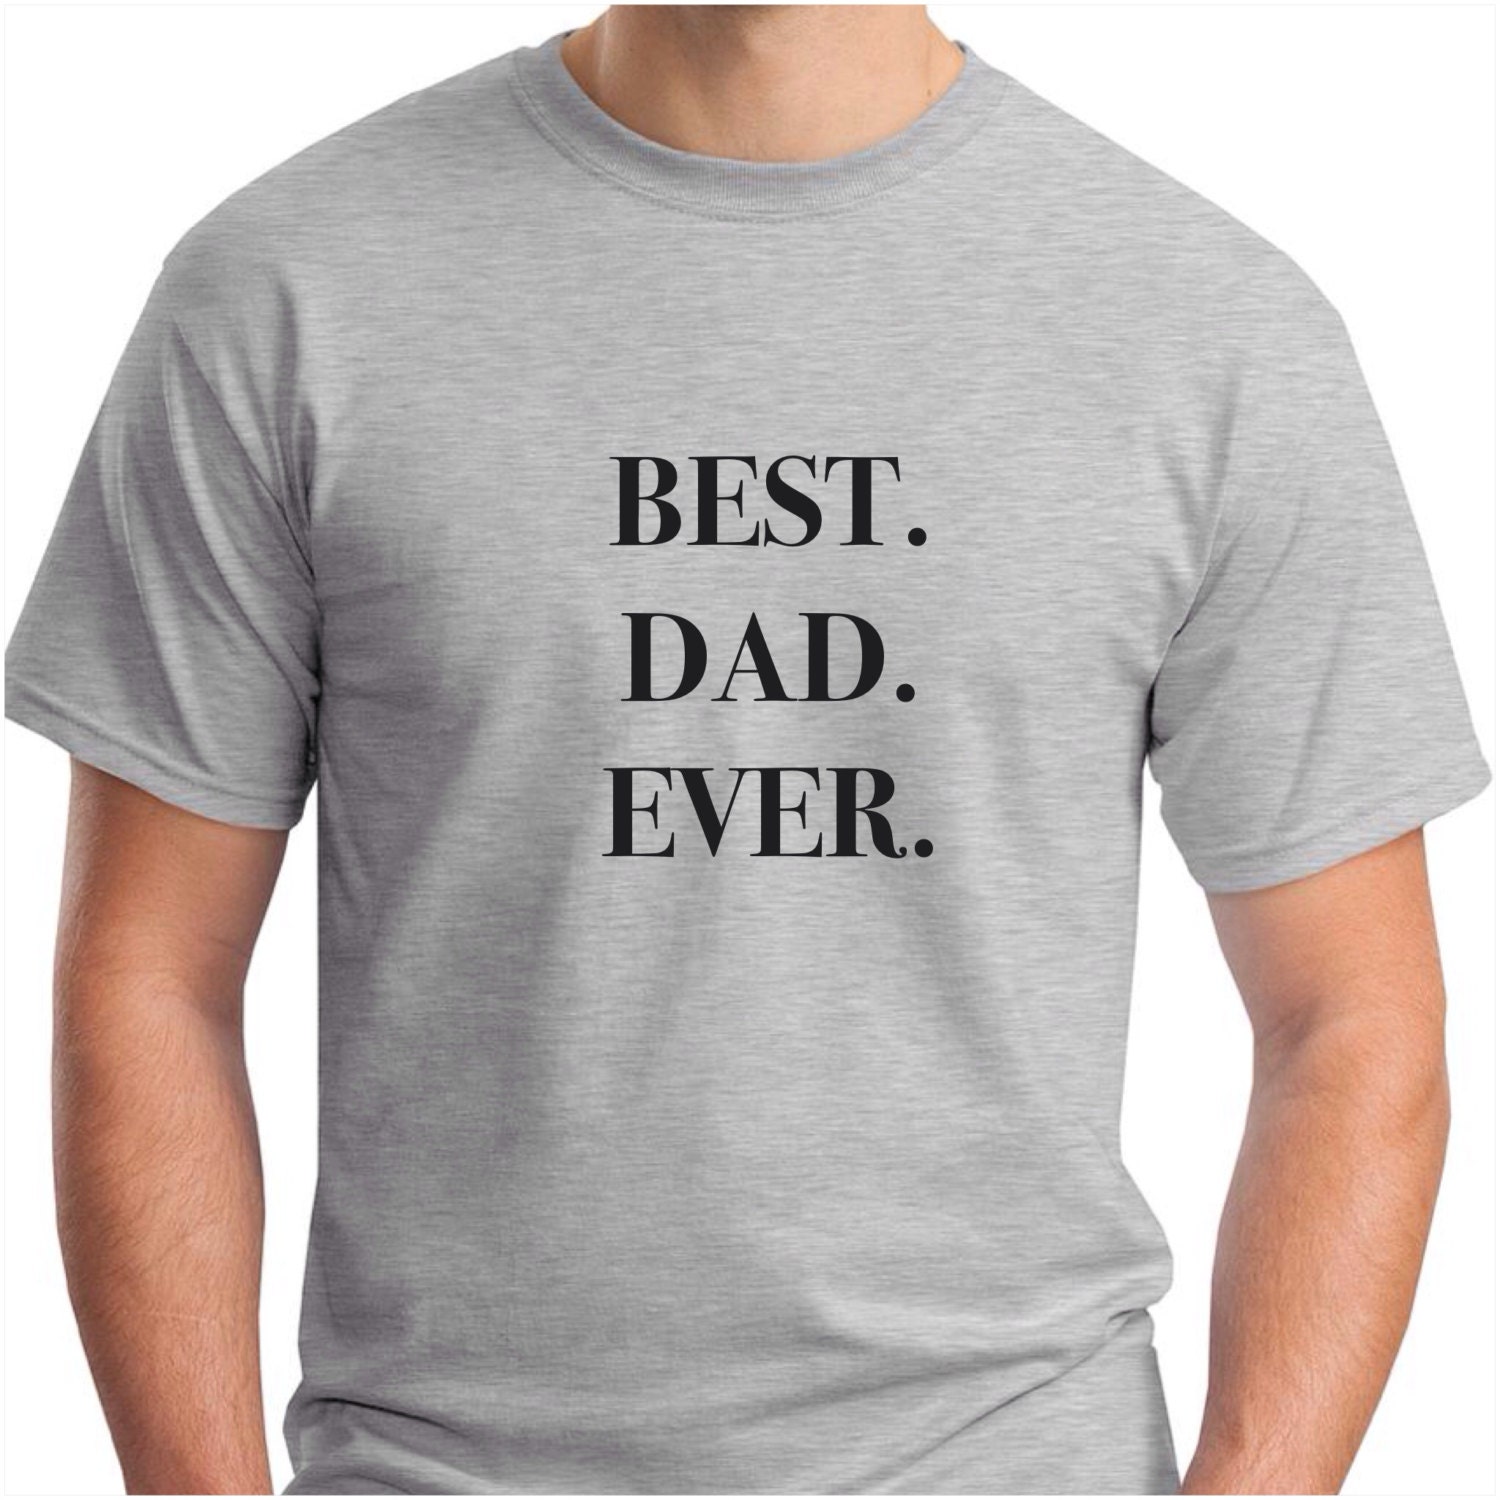 Best Dad Ever Tshirt. Father's Day shirt. Many colors and